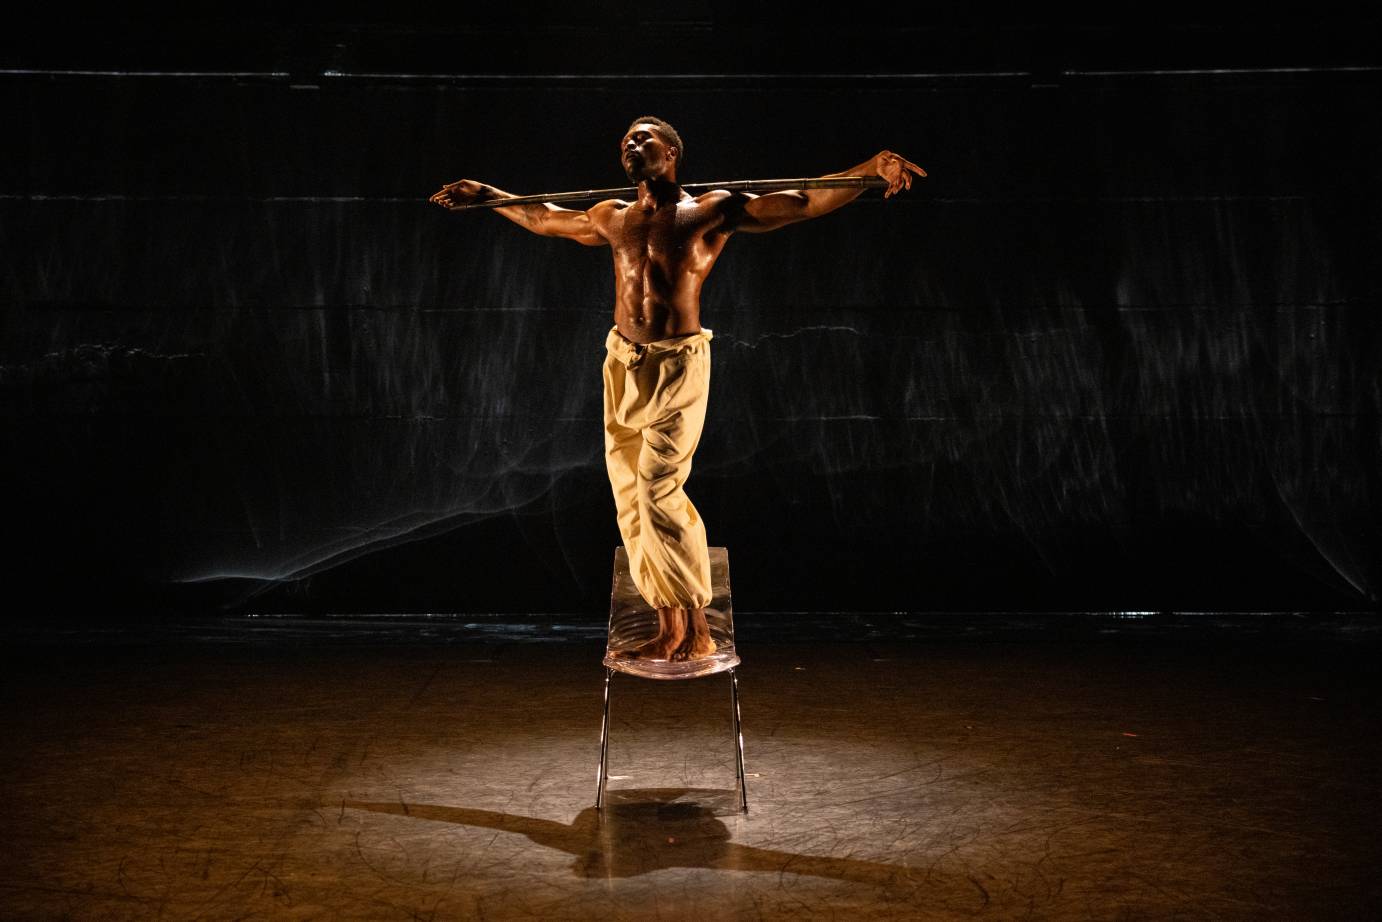 a Black man shining with sweat holds a stick across his shoulders as he balances on a chair. He looks like Christ on the Cross.